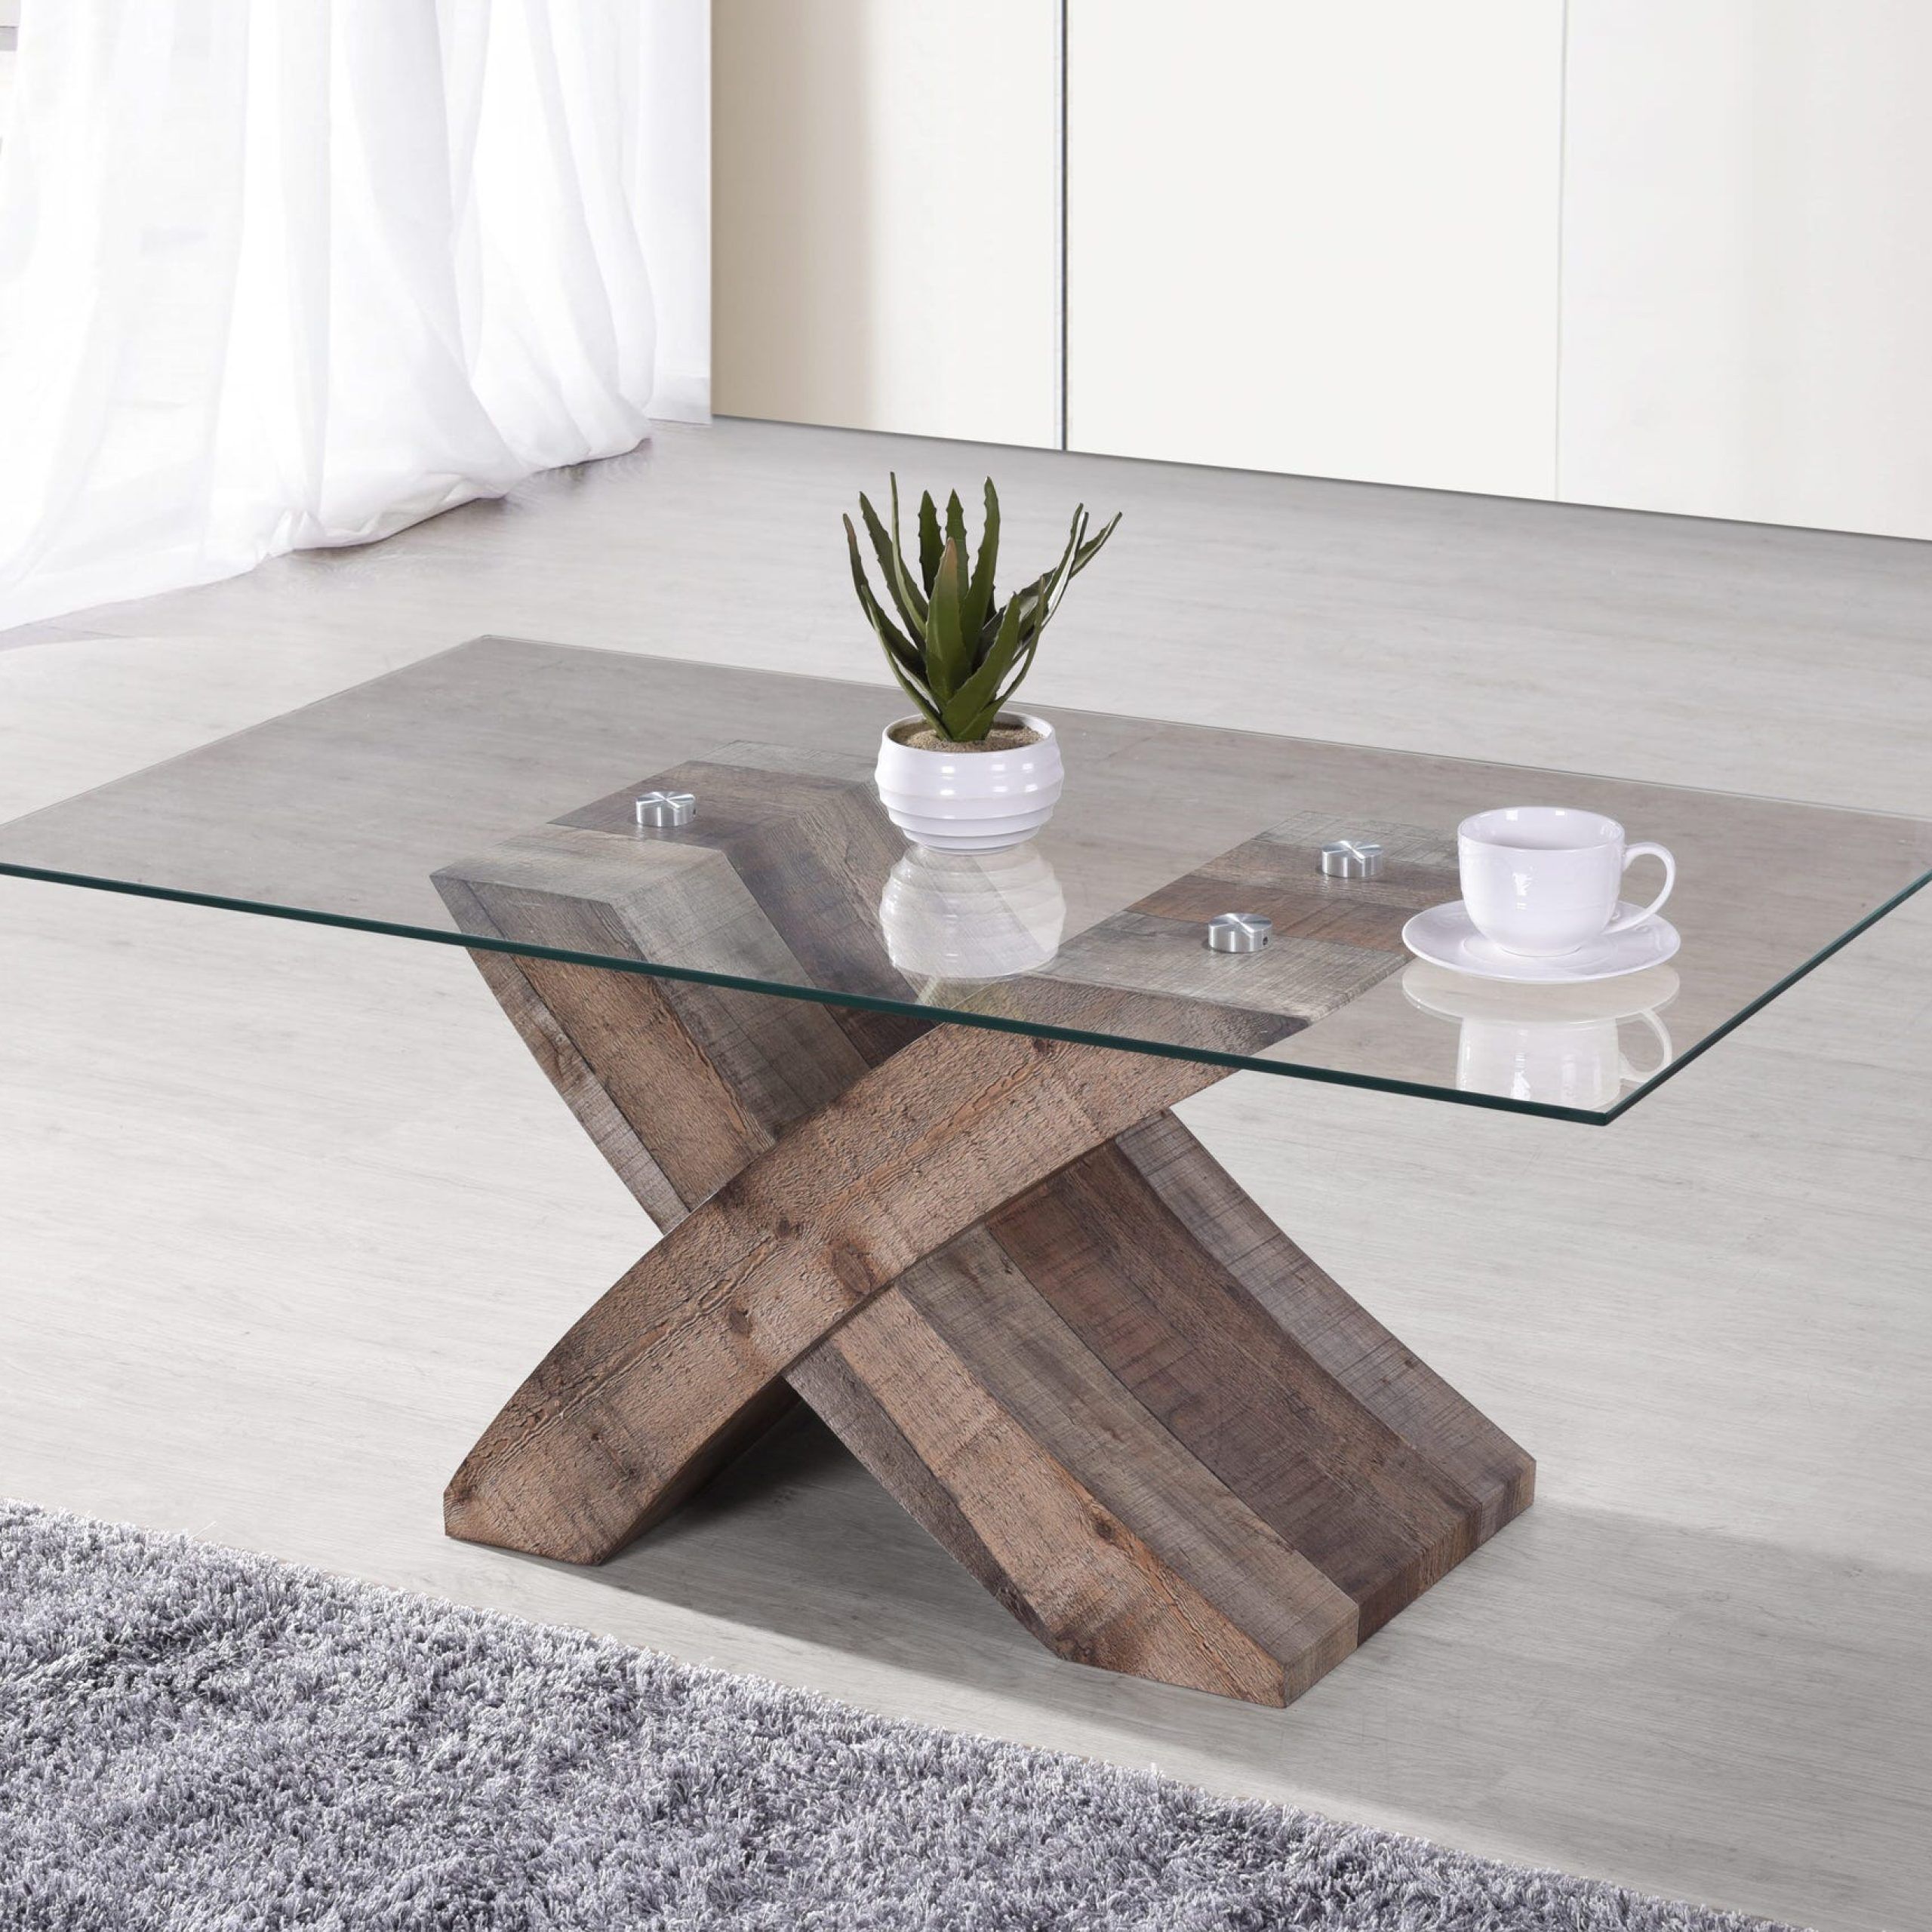 Rustic Wood And Glass Coffee Table – A Rustic Coffee Table Provides The Throughout Wood Tempered Glass Top Coffee Tables (Gallery 15 of 20)